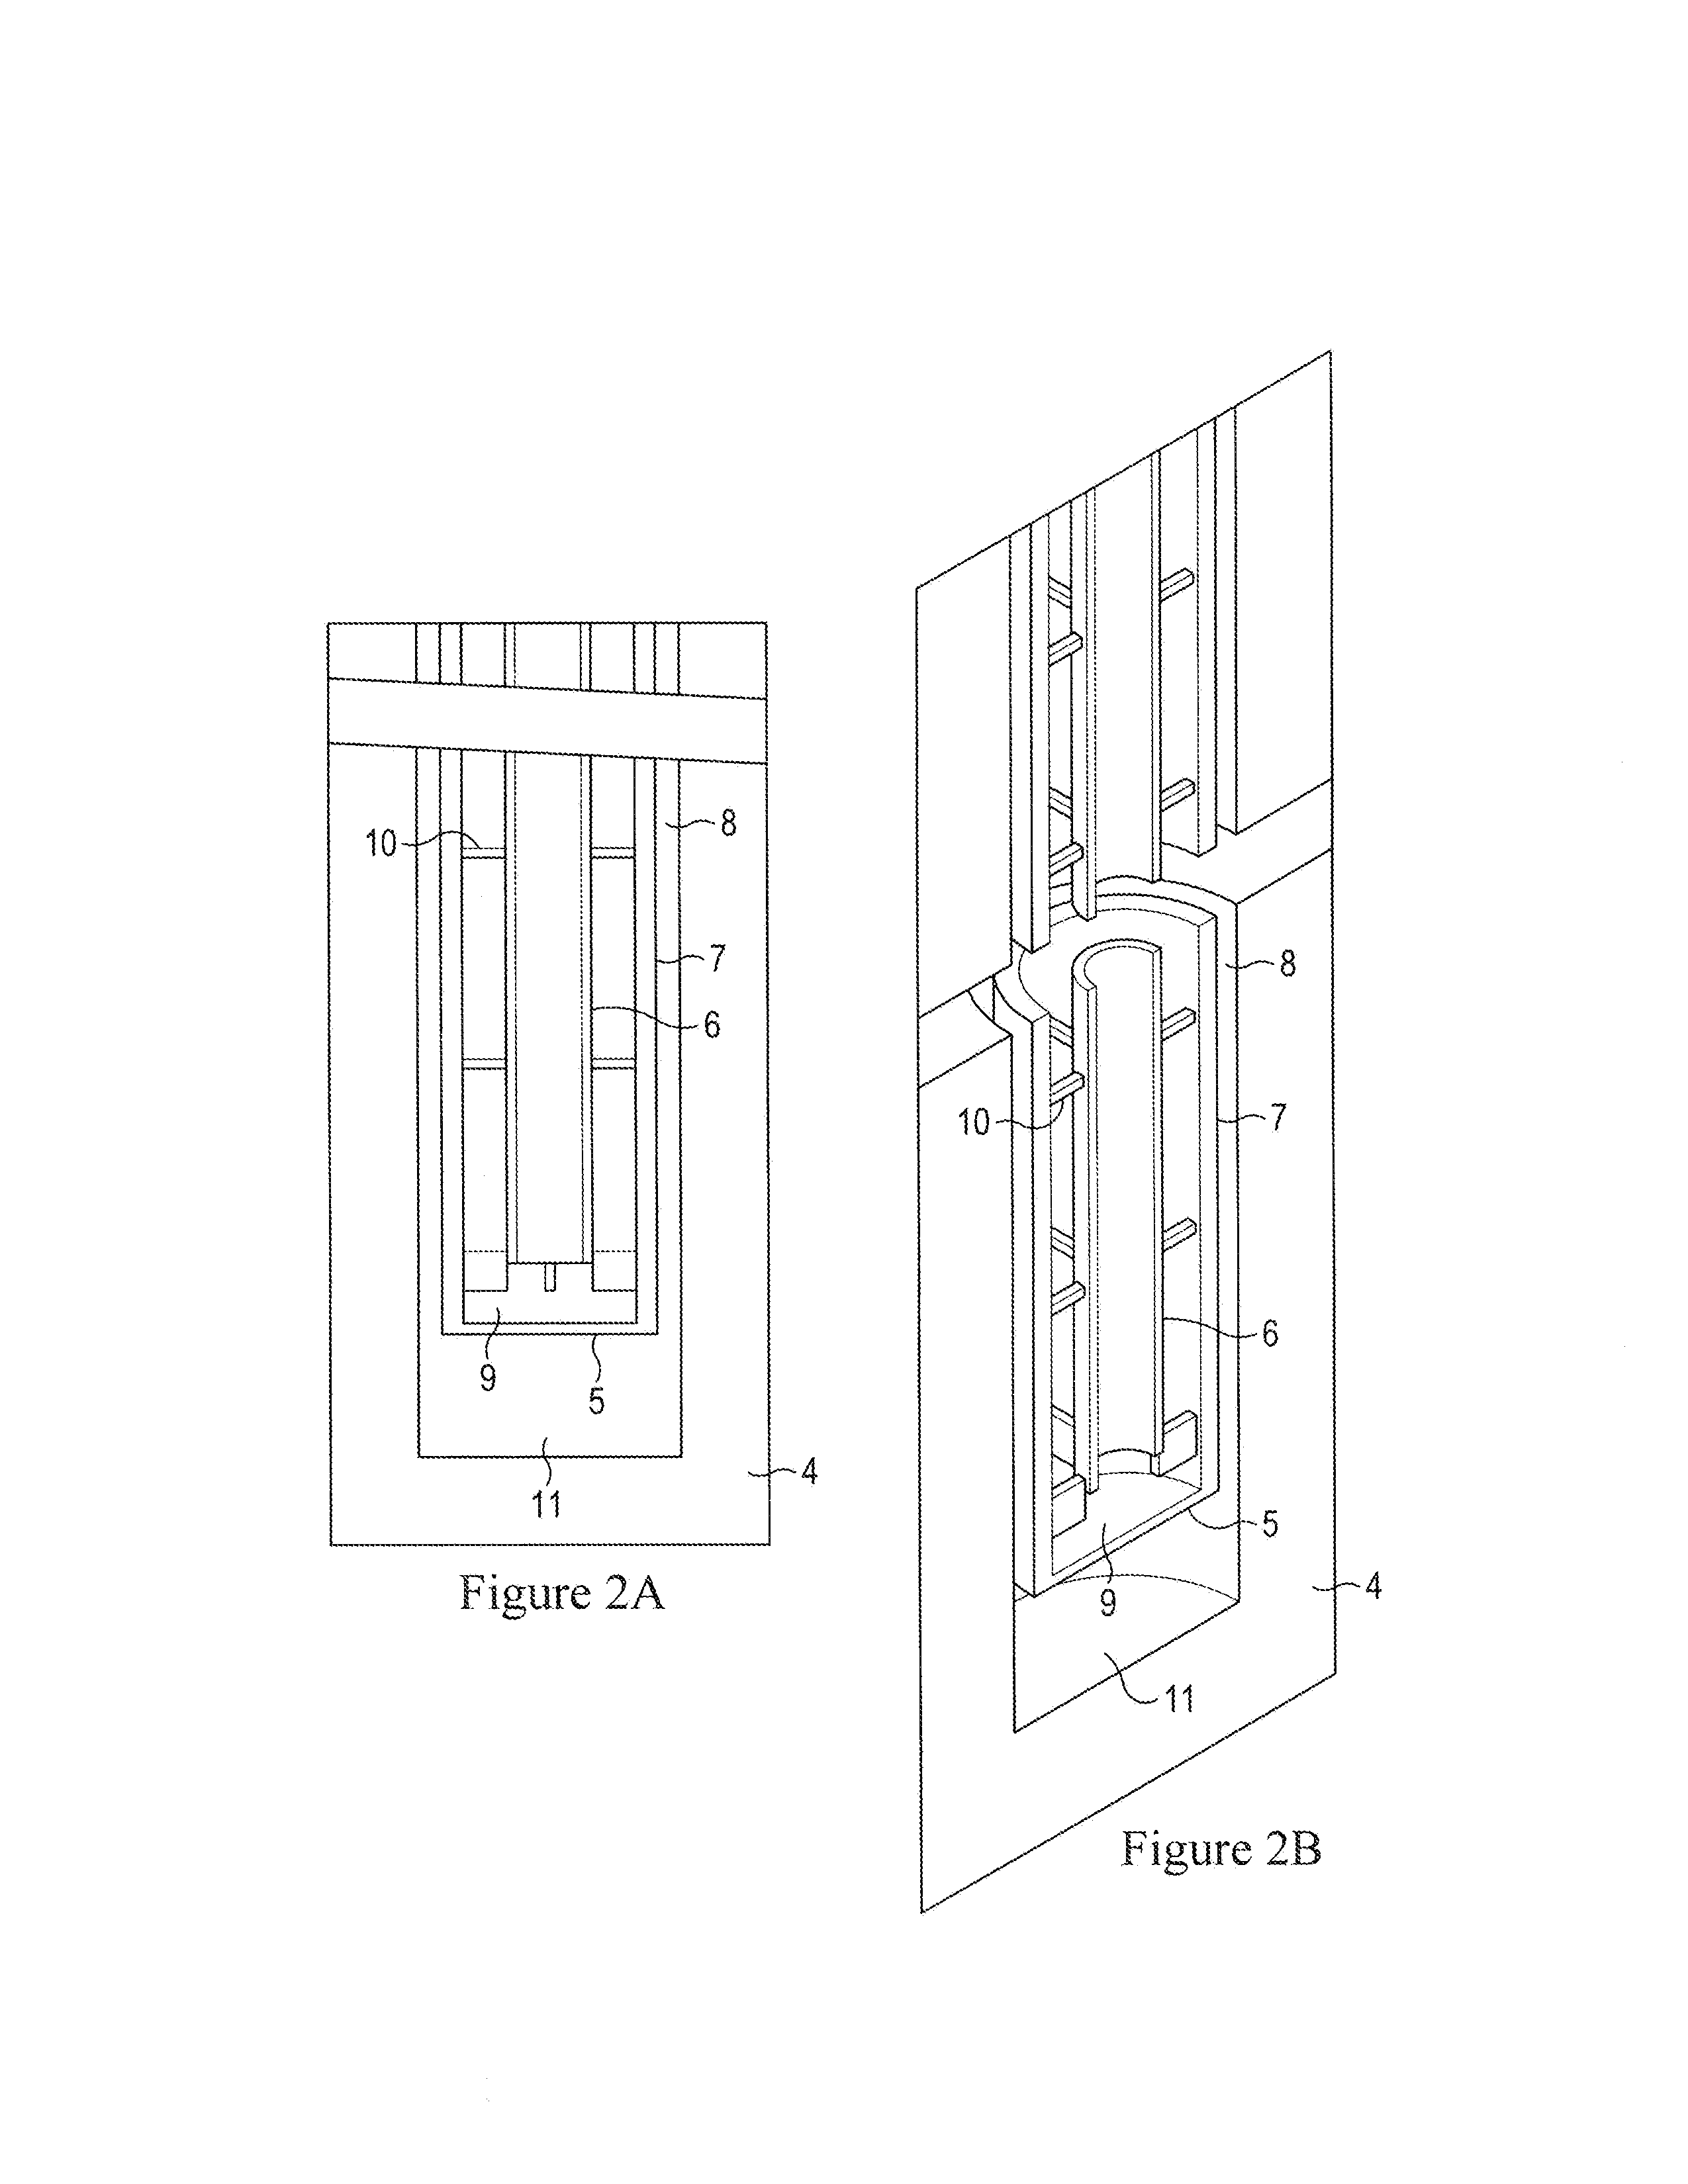 Geothermal loop in-ground heat exchanger for energy extraction